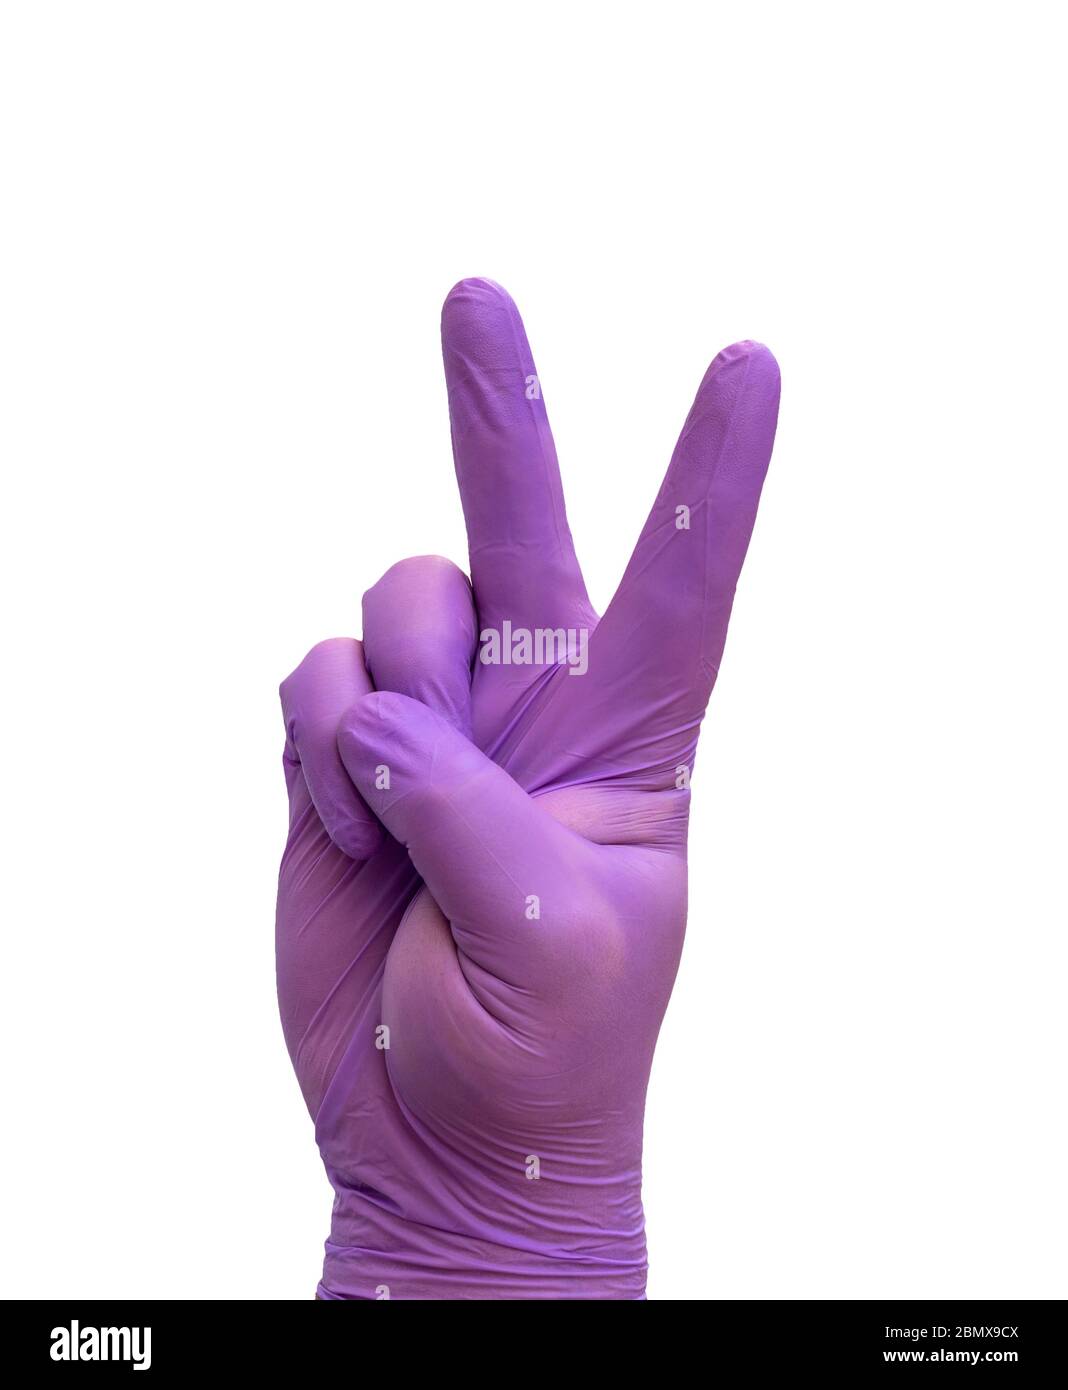 hand with medical glove doing the Victory gesture, symbolizing the win over COVID-19. Stock Photo